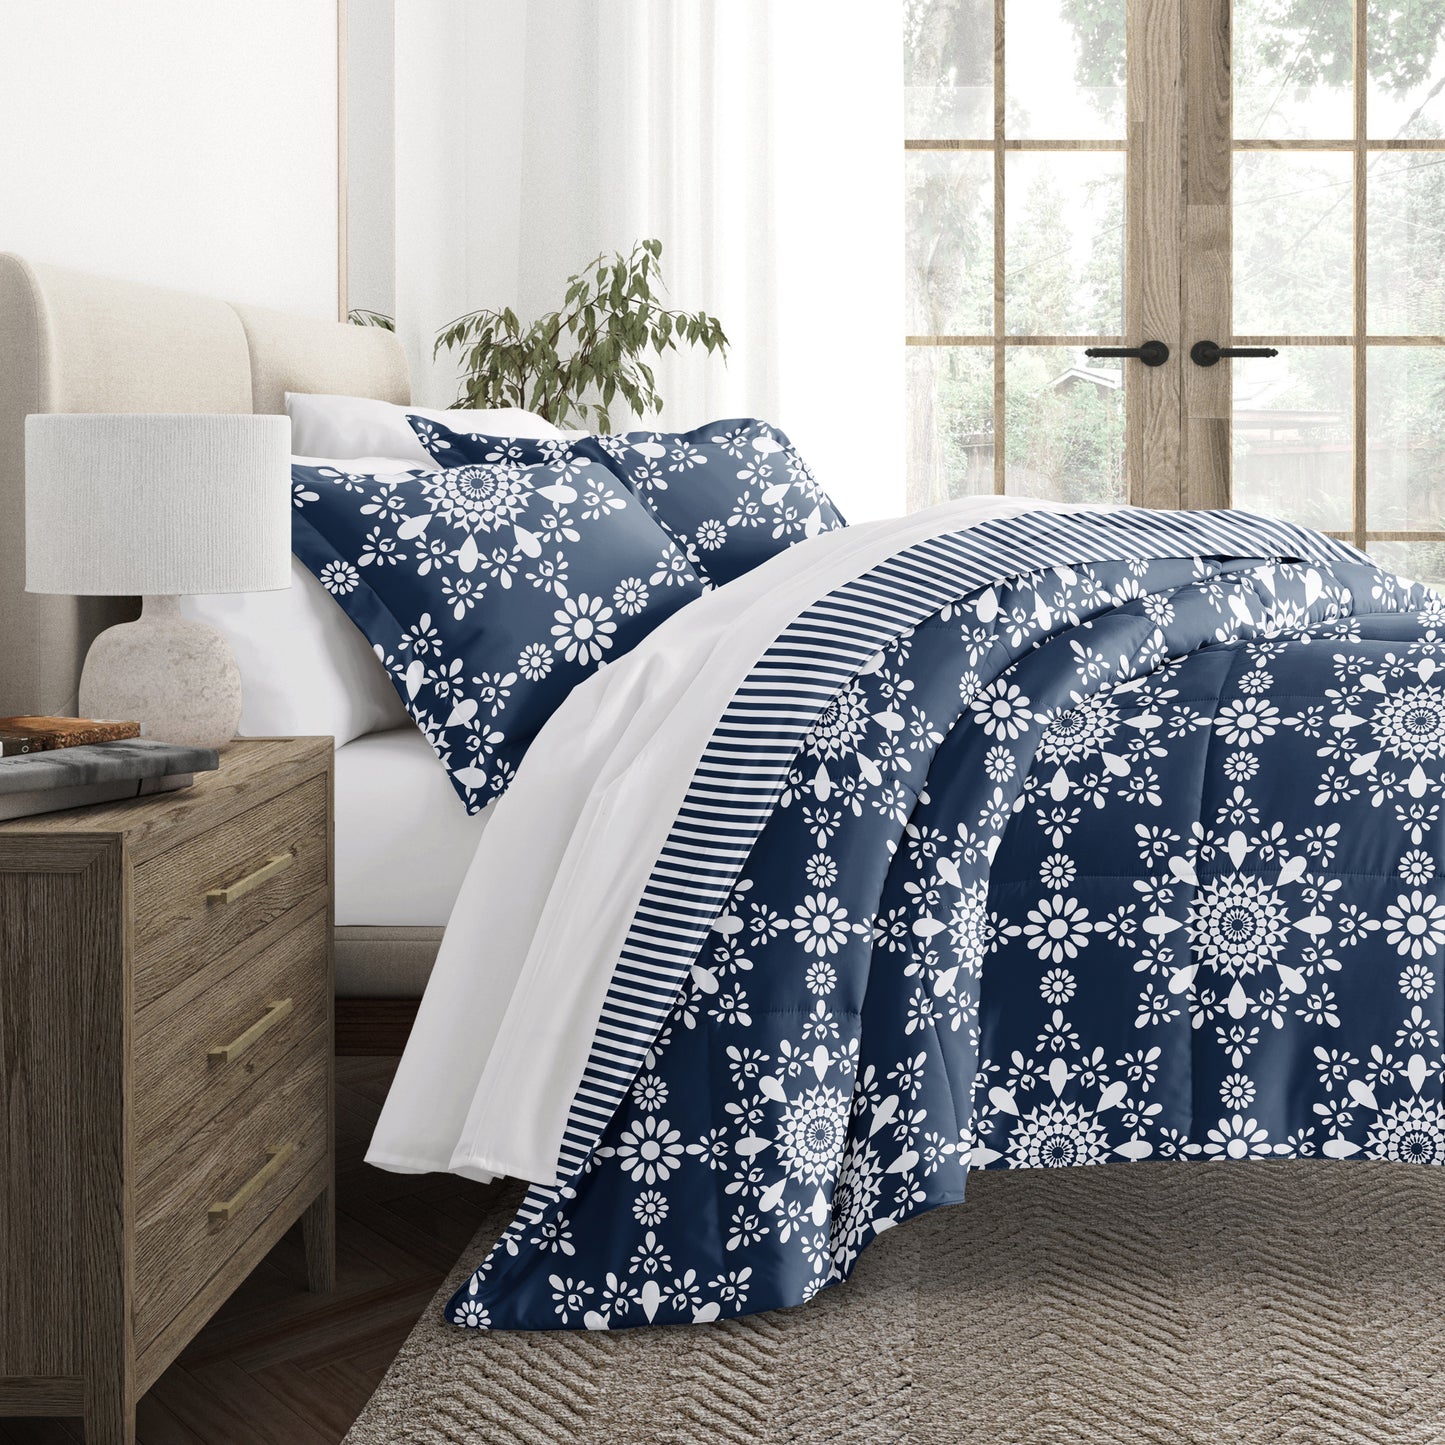 Comforter Sets in Two Reversible Patterns